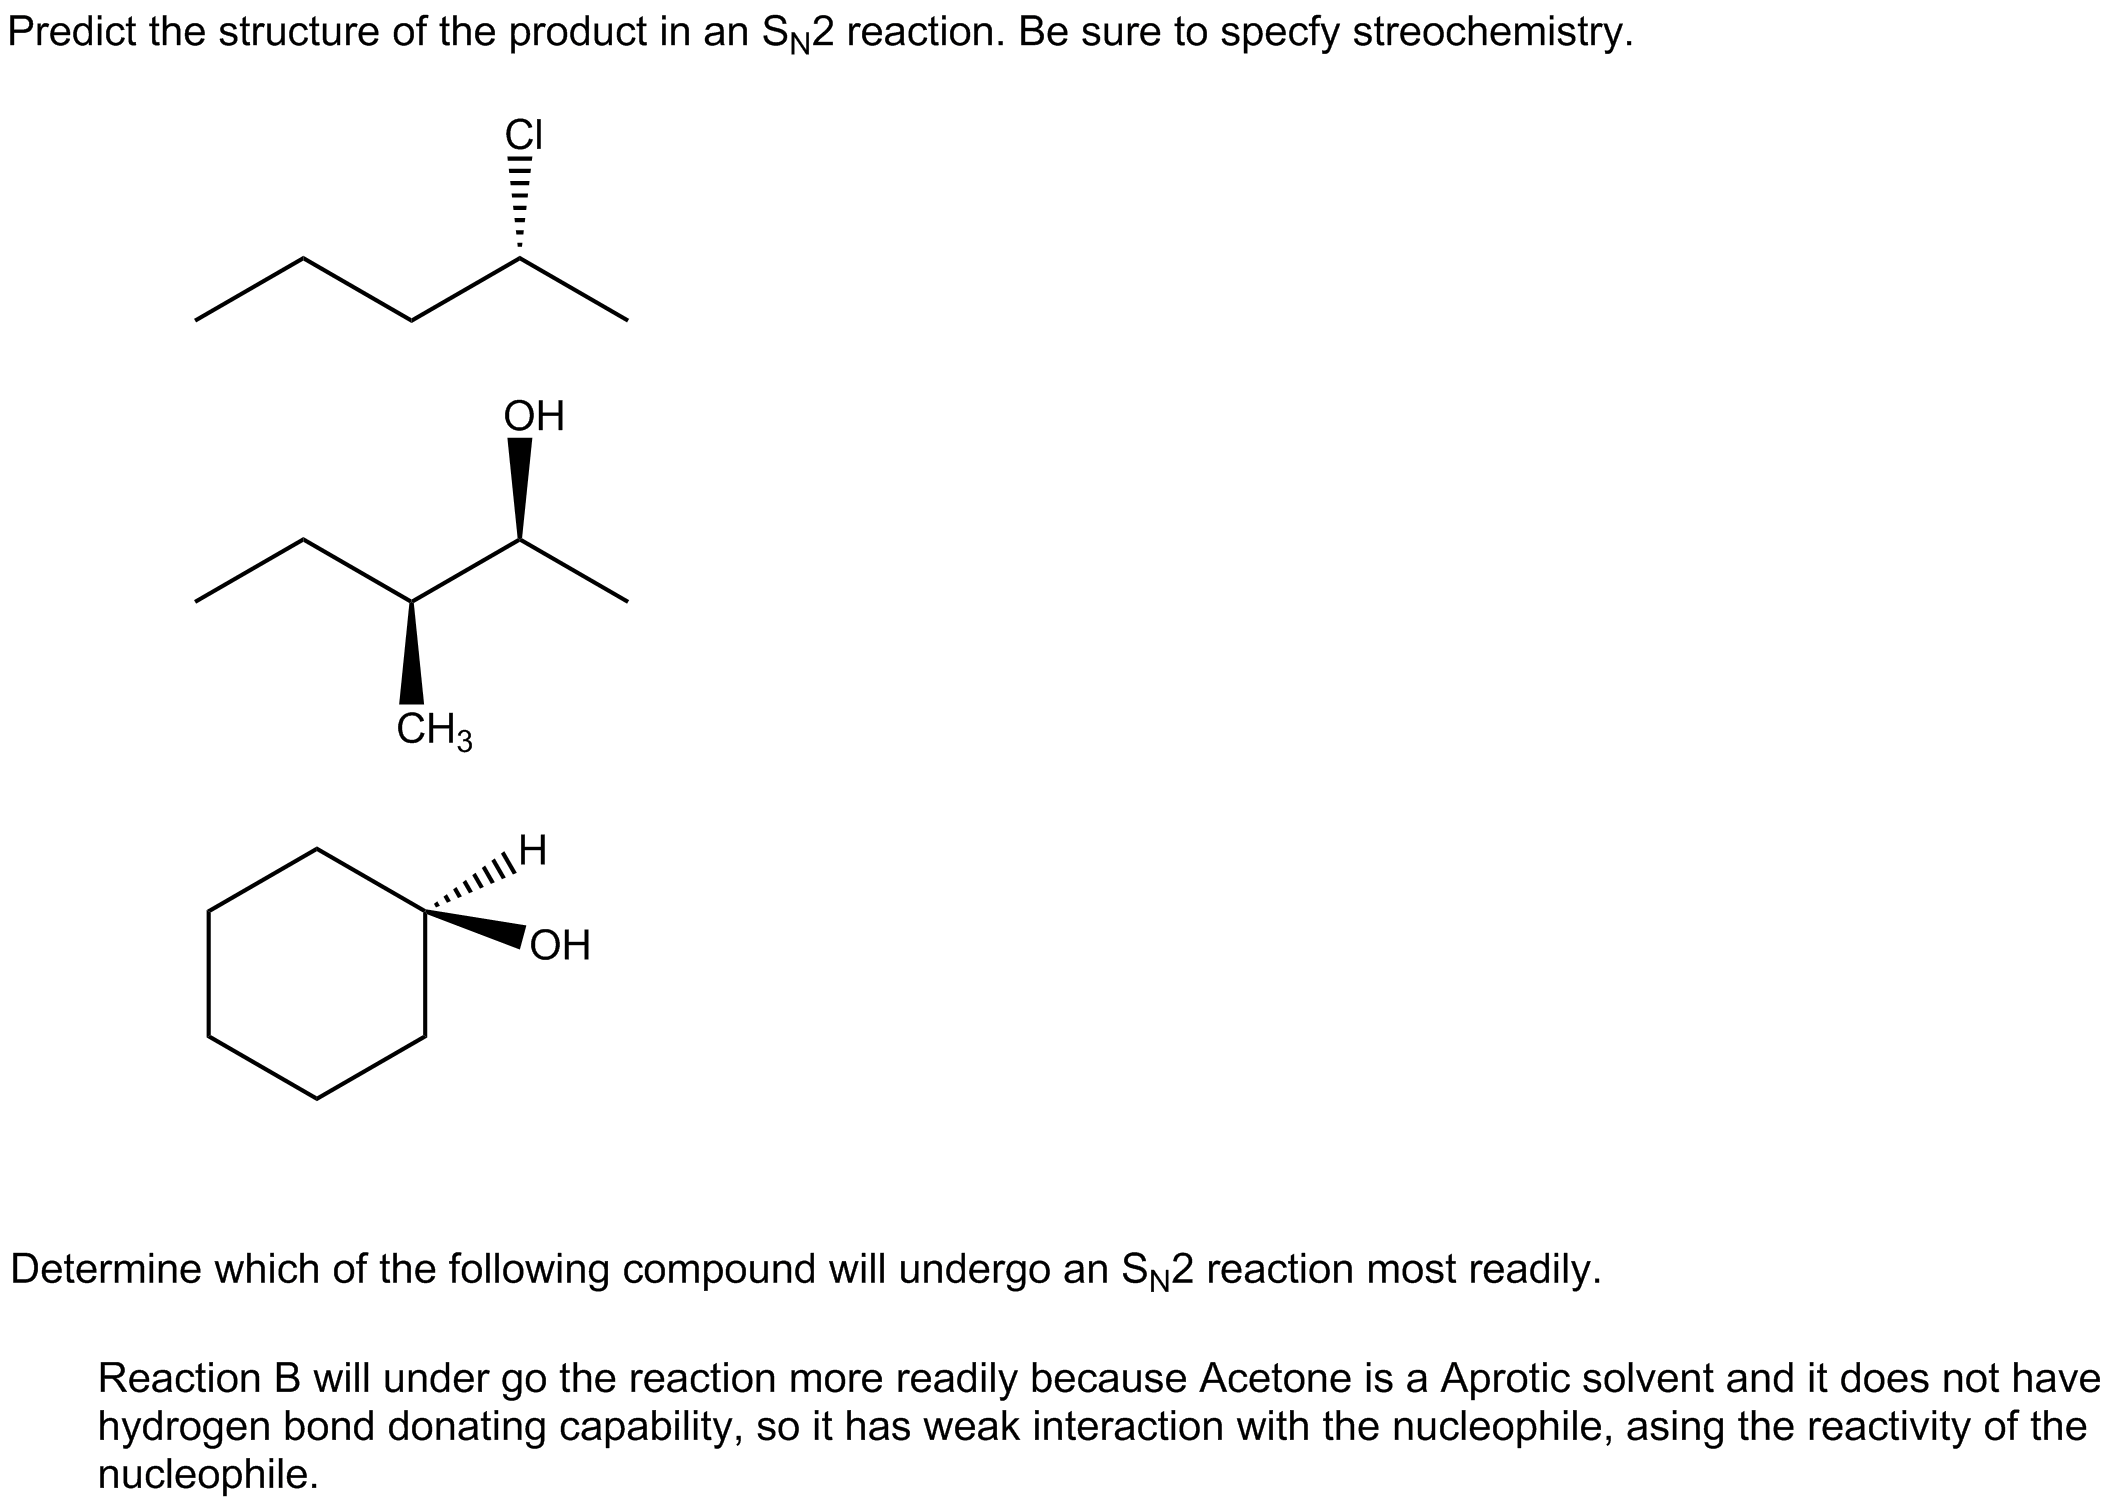 solution substituion reaction.png